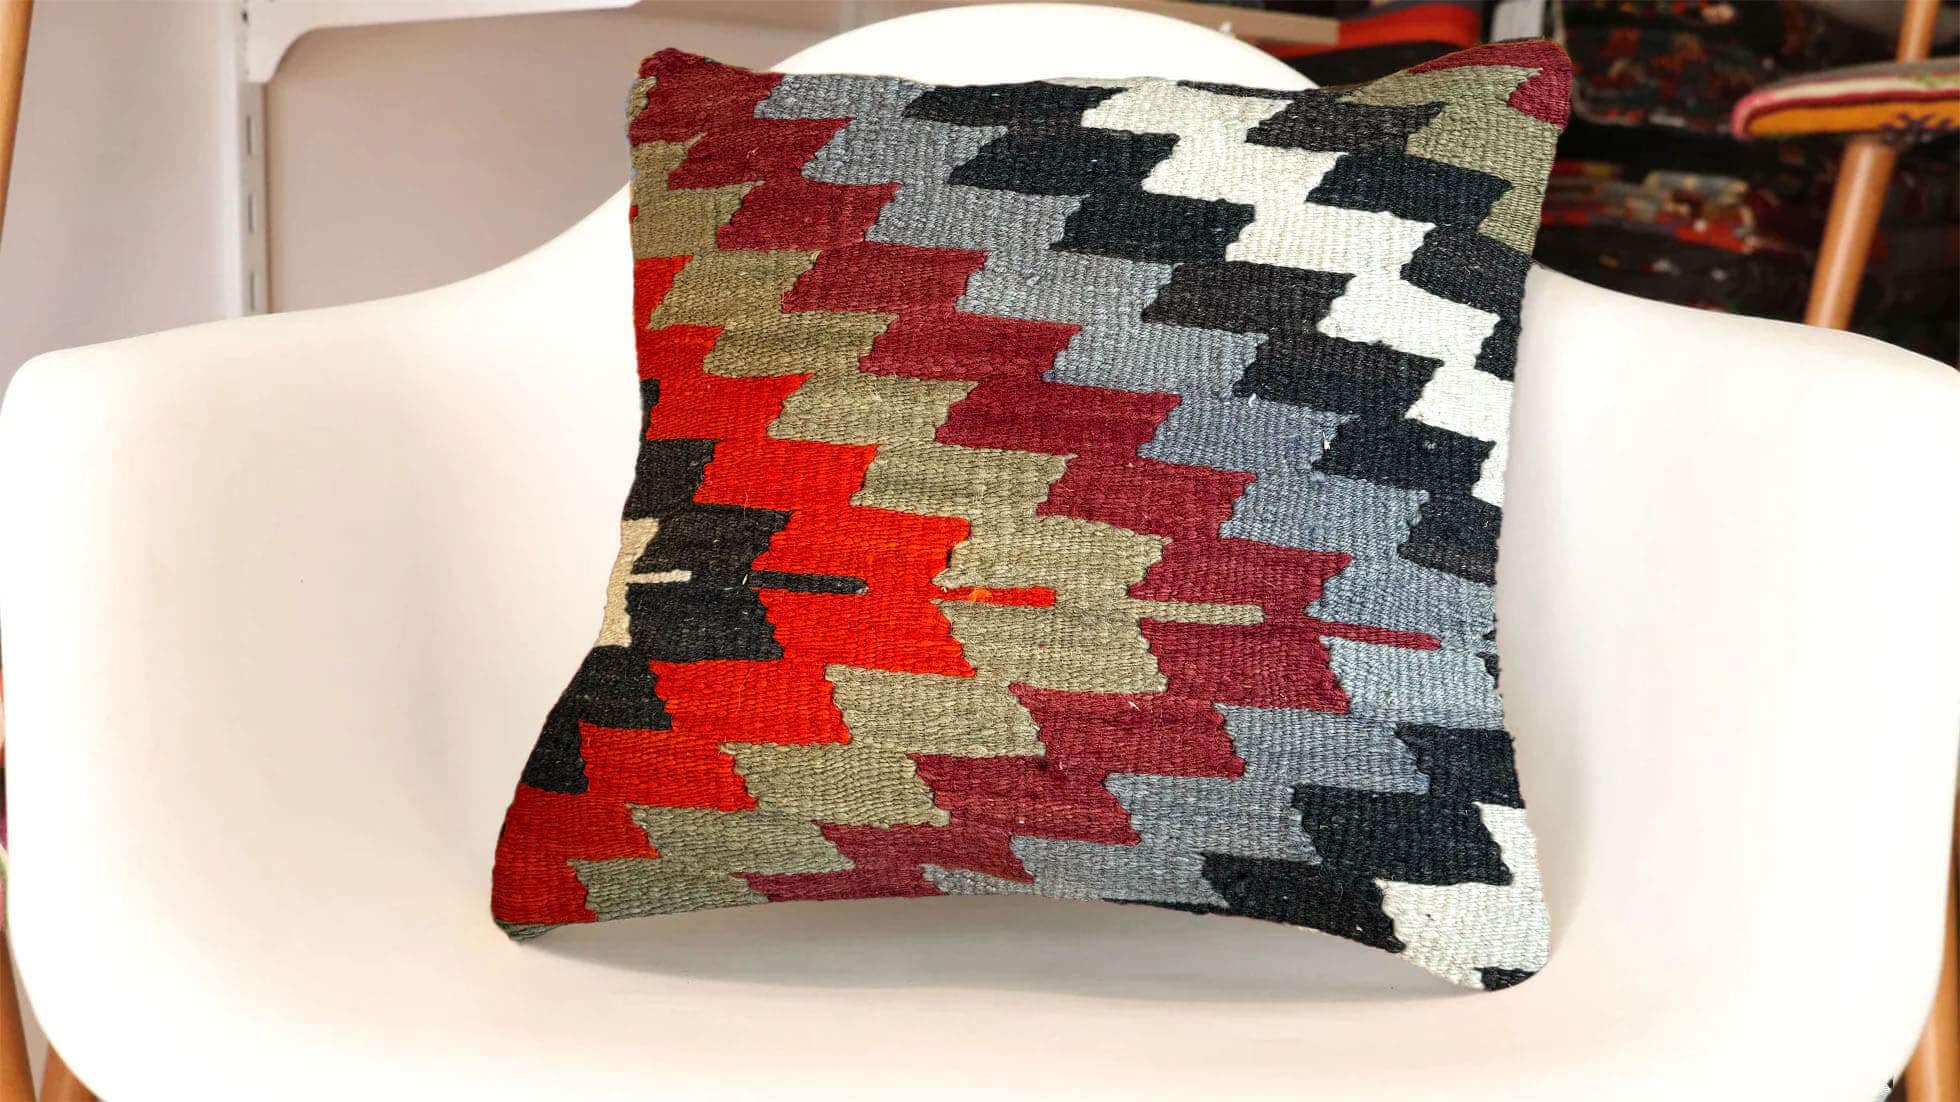 Vintage Mid-Century Kilim Throw Pillow in Rustic Tones with Geometric Lozenge Patterns